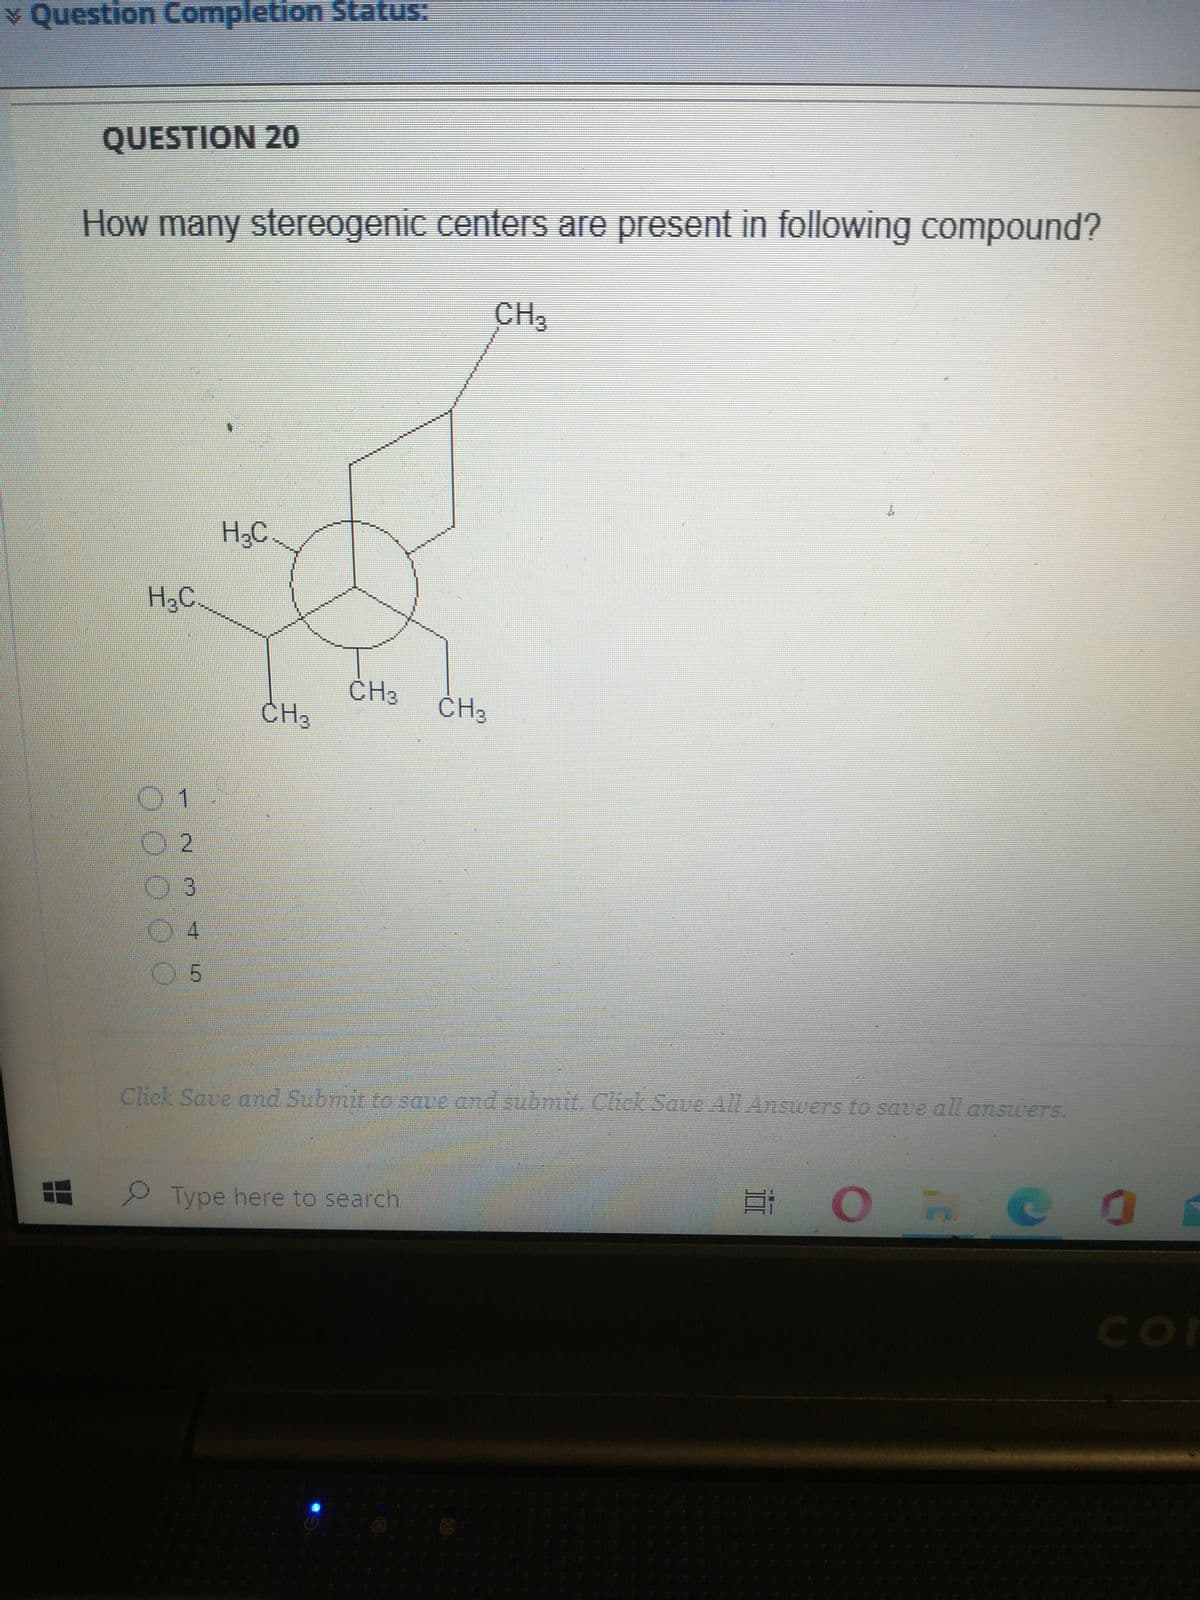 v Question Completion Status:
QUESTION 20
How many stereogenic centers are present in following compound?
CH3
H¿C
H3C.
CH3
ČH3
ČH3
04
05
Click Save and Submit to save and submit. Cick Saue All Answers to save all answers.
Type here to search
CO
CO
